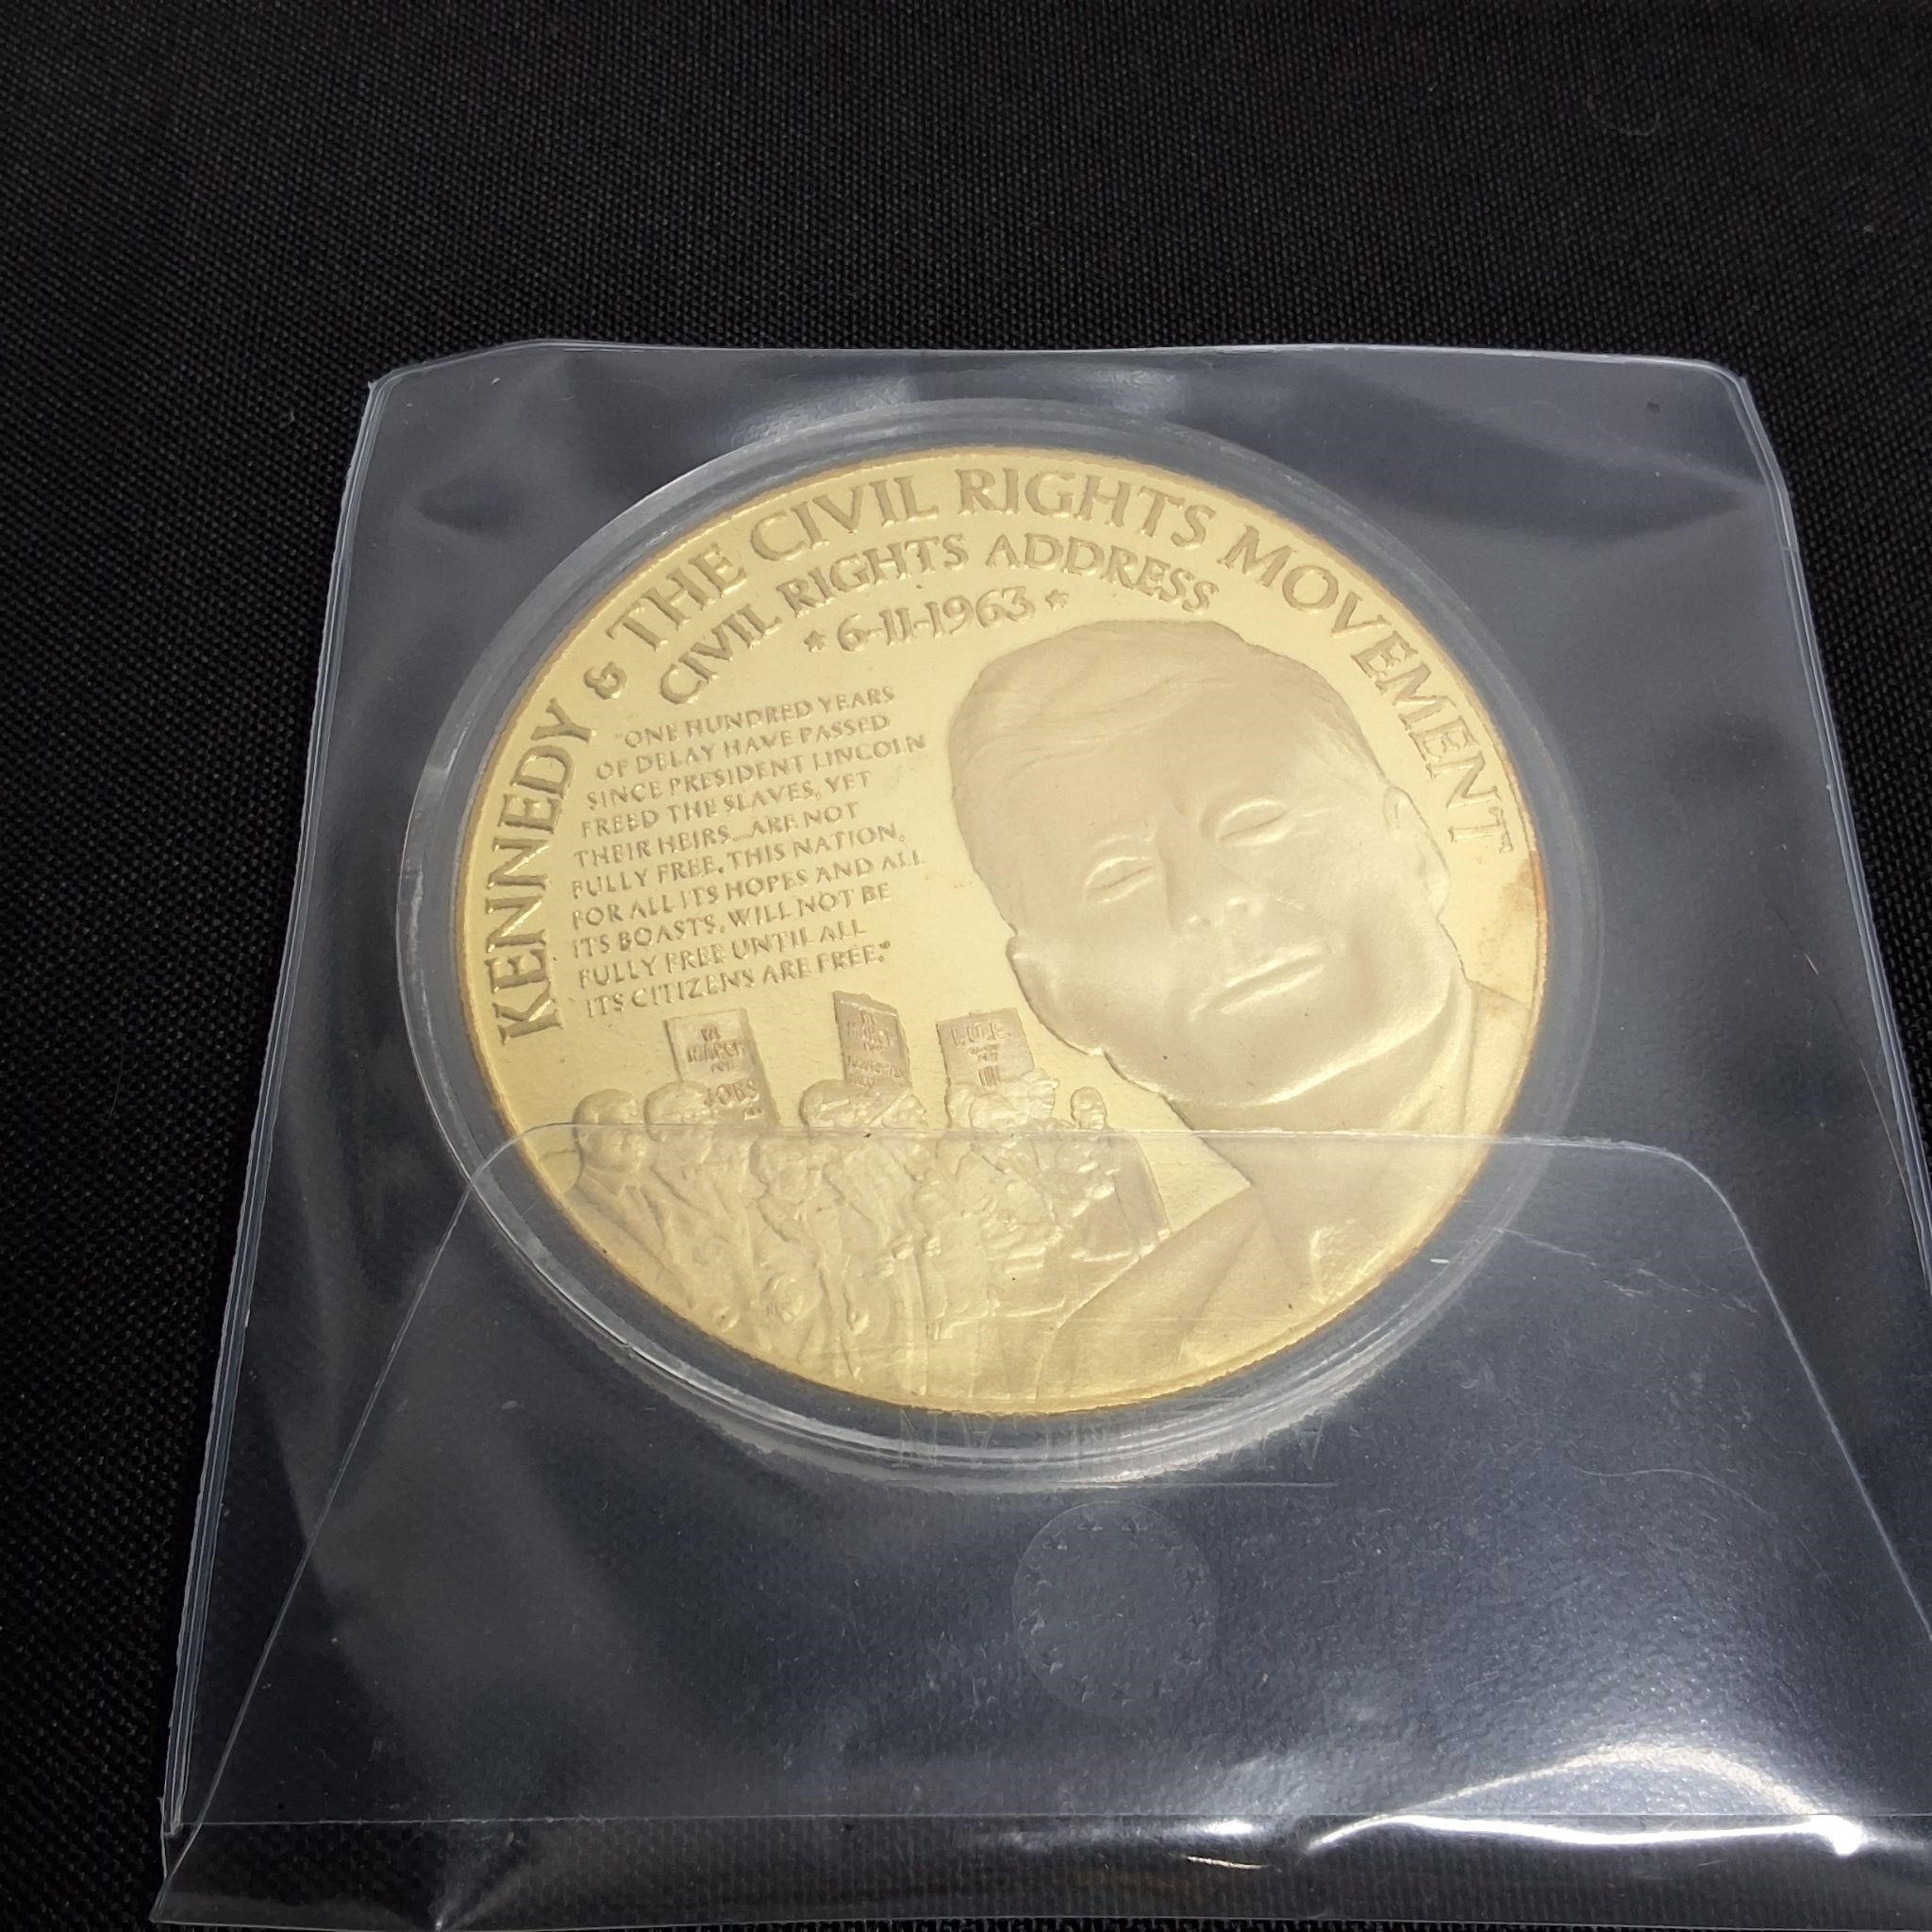 2.75 INCH KENNEDY COMMEMORATIVE COIN